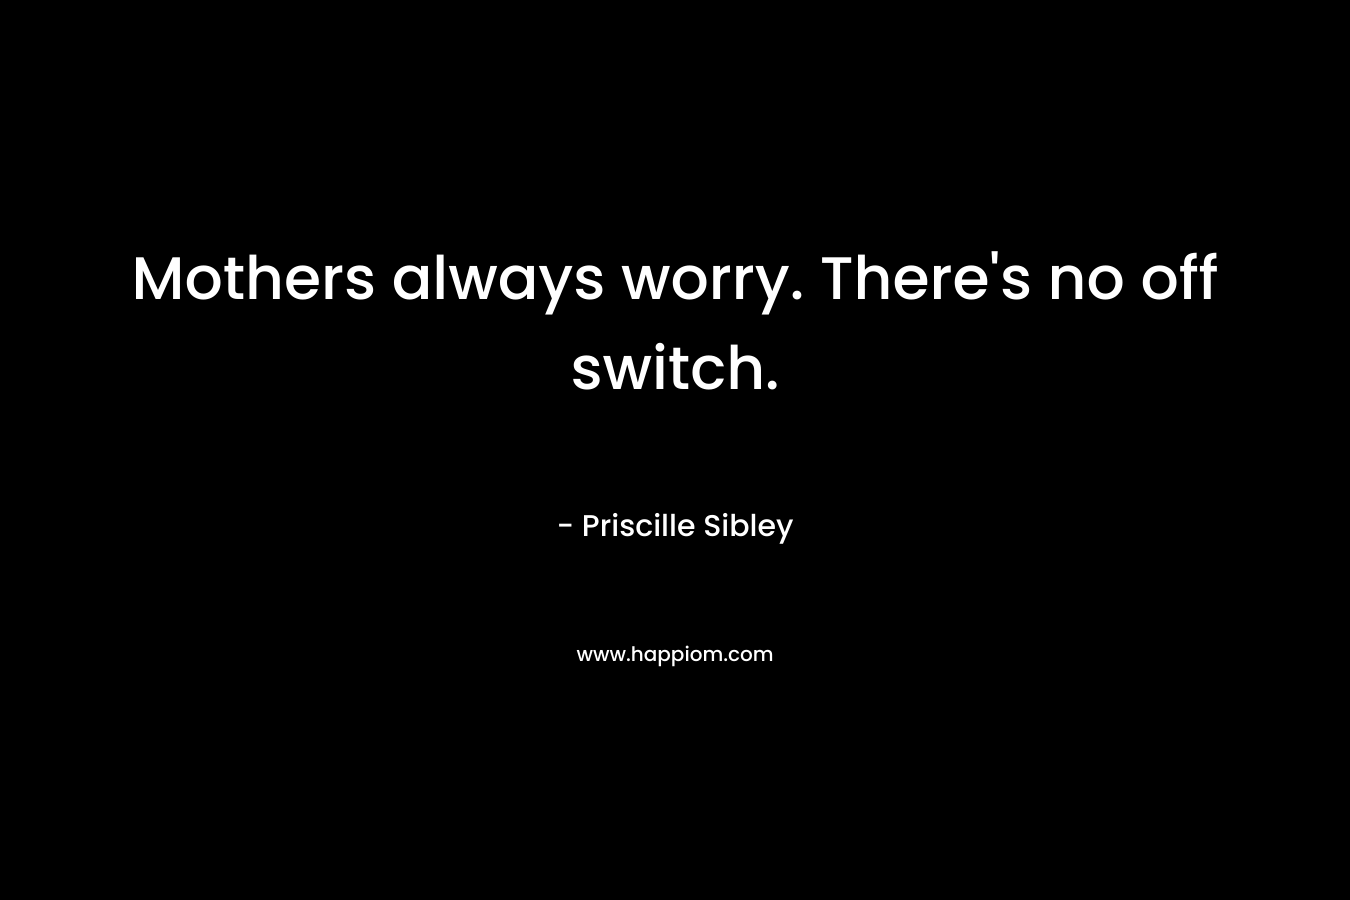 Mothers always worry. There’s no off switch. – Priscille Sibley